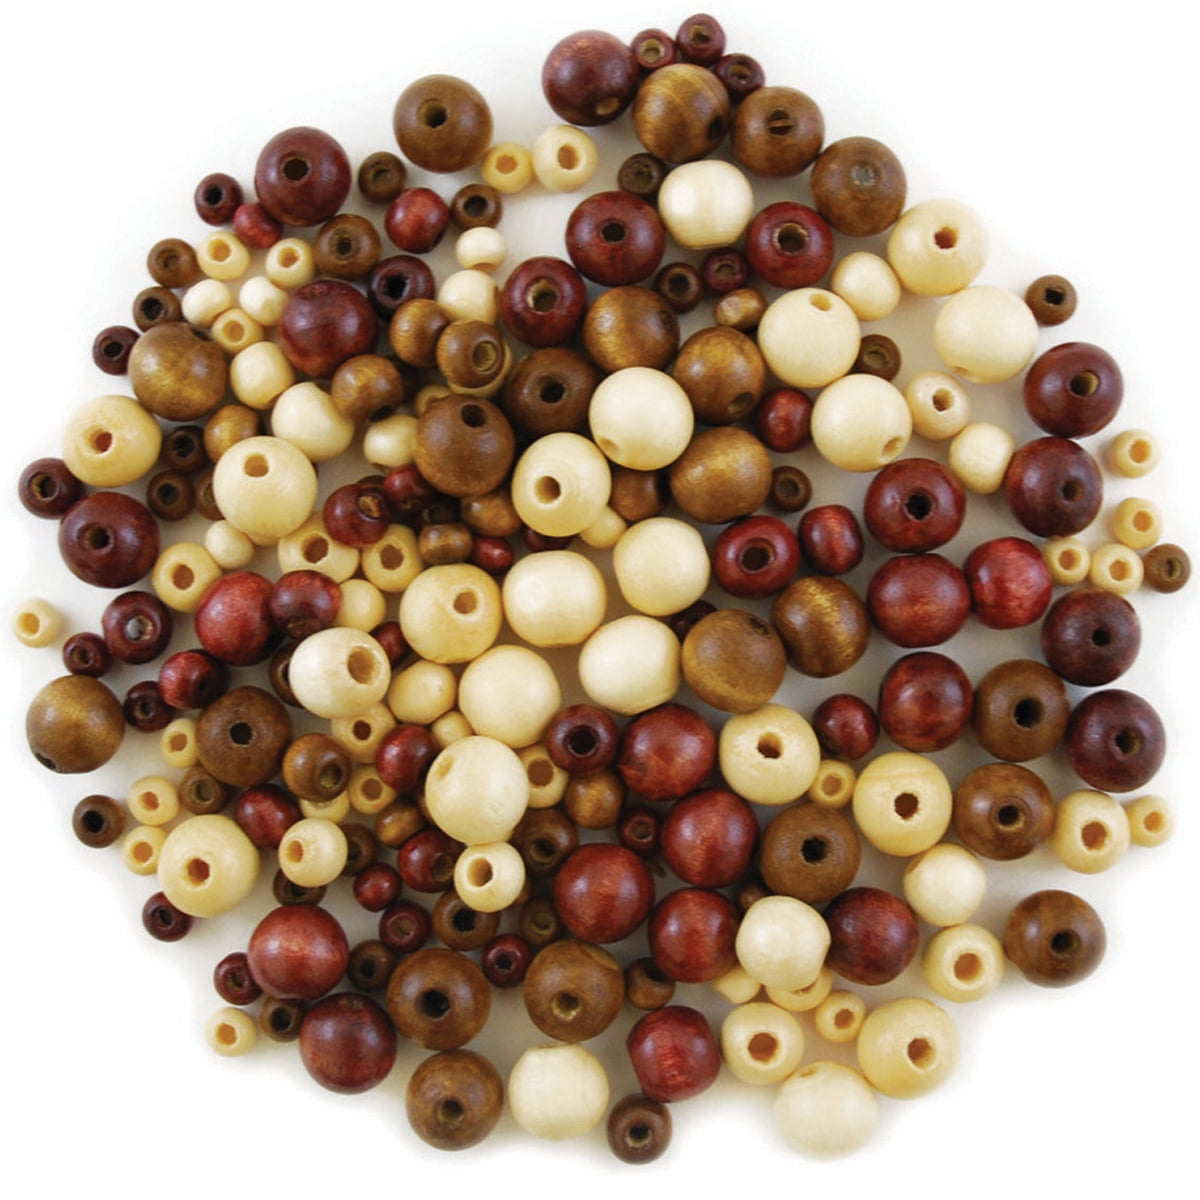 Large Mixed Wooden Craft Beads, Eco Art and Craft